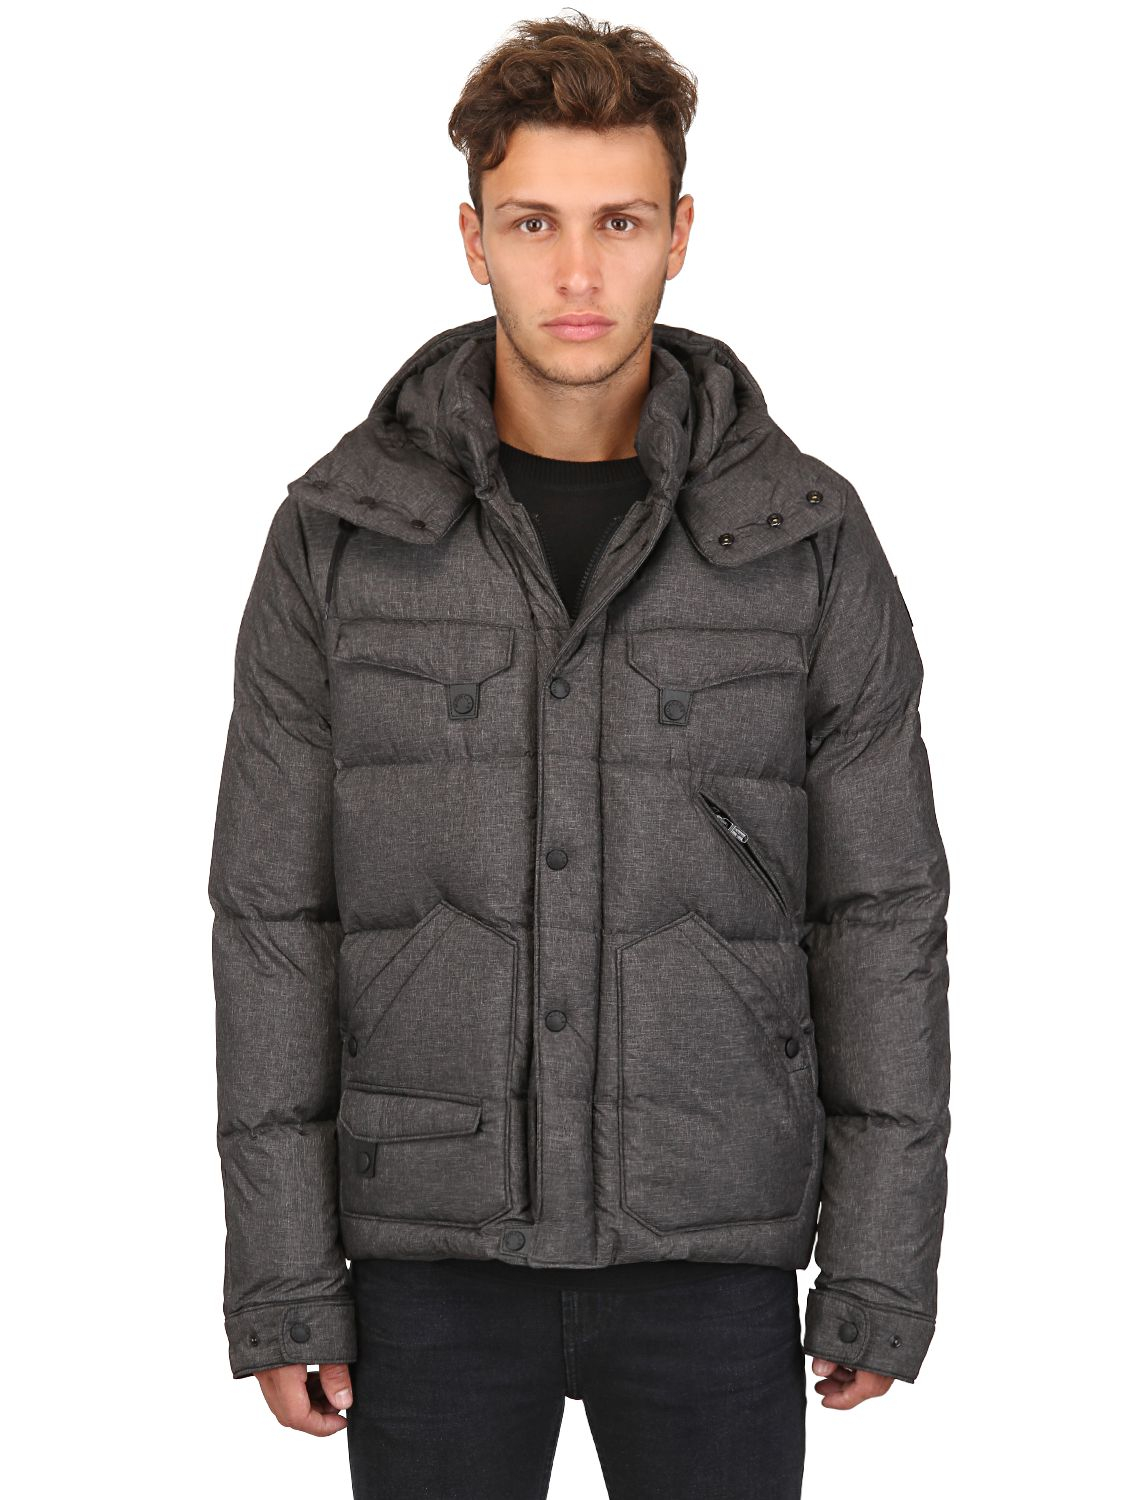 Lyst - Moncler Havoc Chambray Techno Down Jacket in Gray for Men